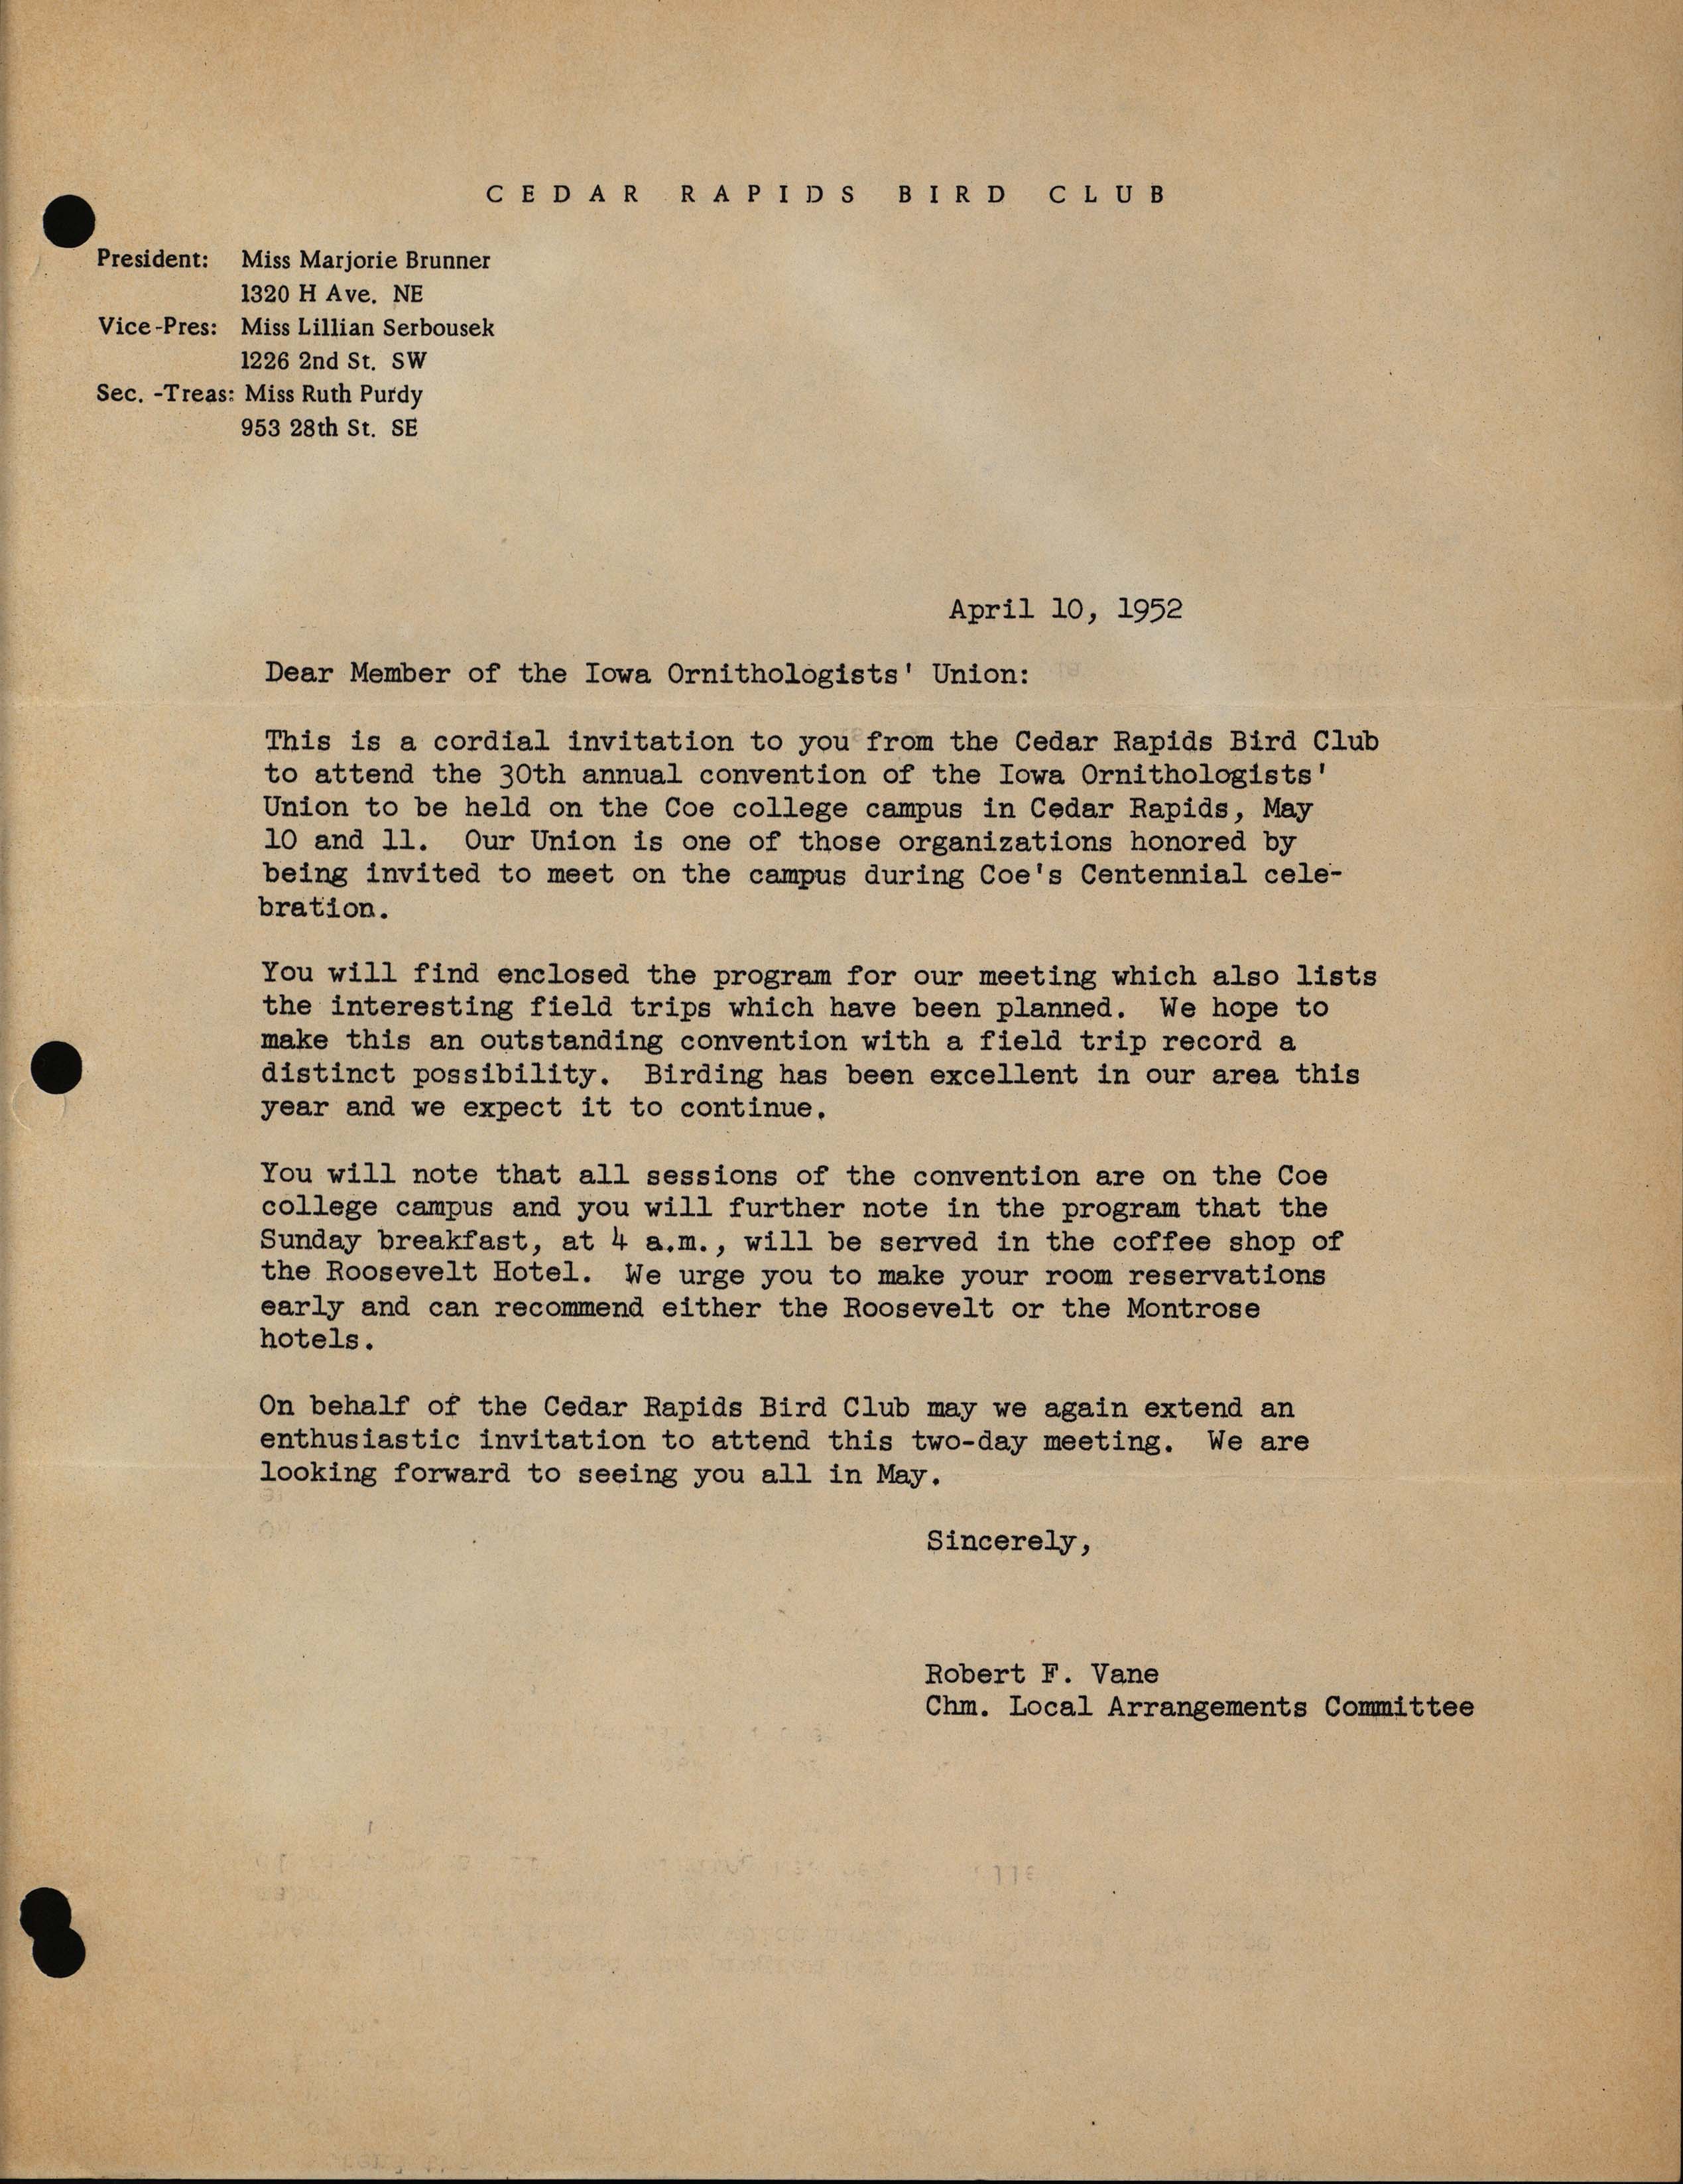 Robert F. Vane letter regarding an invitation to the 30th annual convention of the Iowa Ornithologists' Union, April 10, 1952